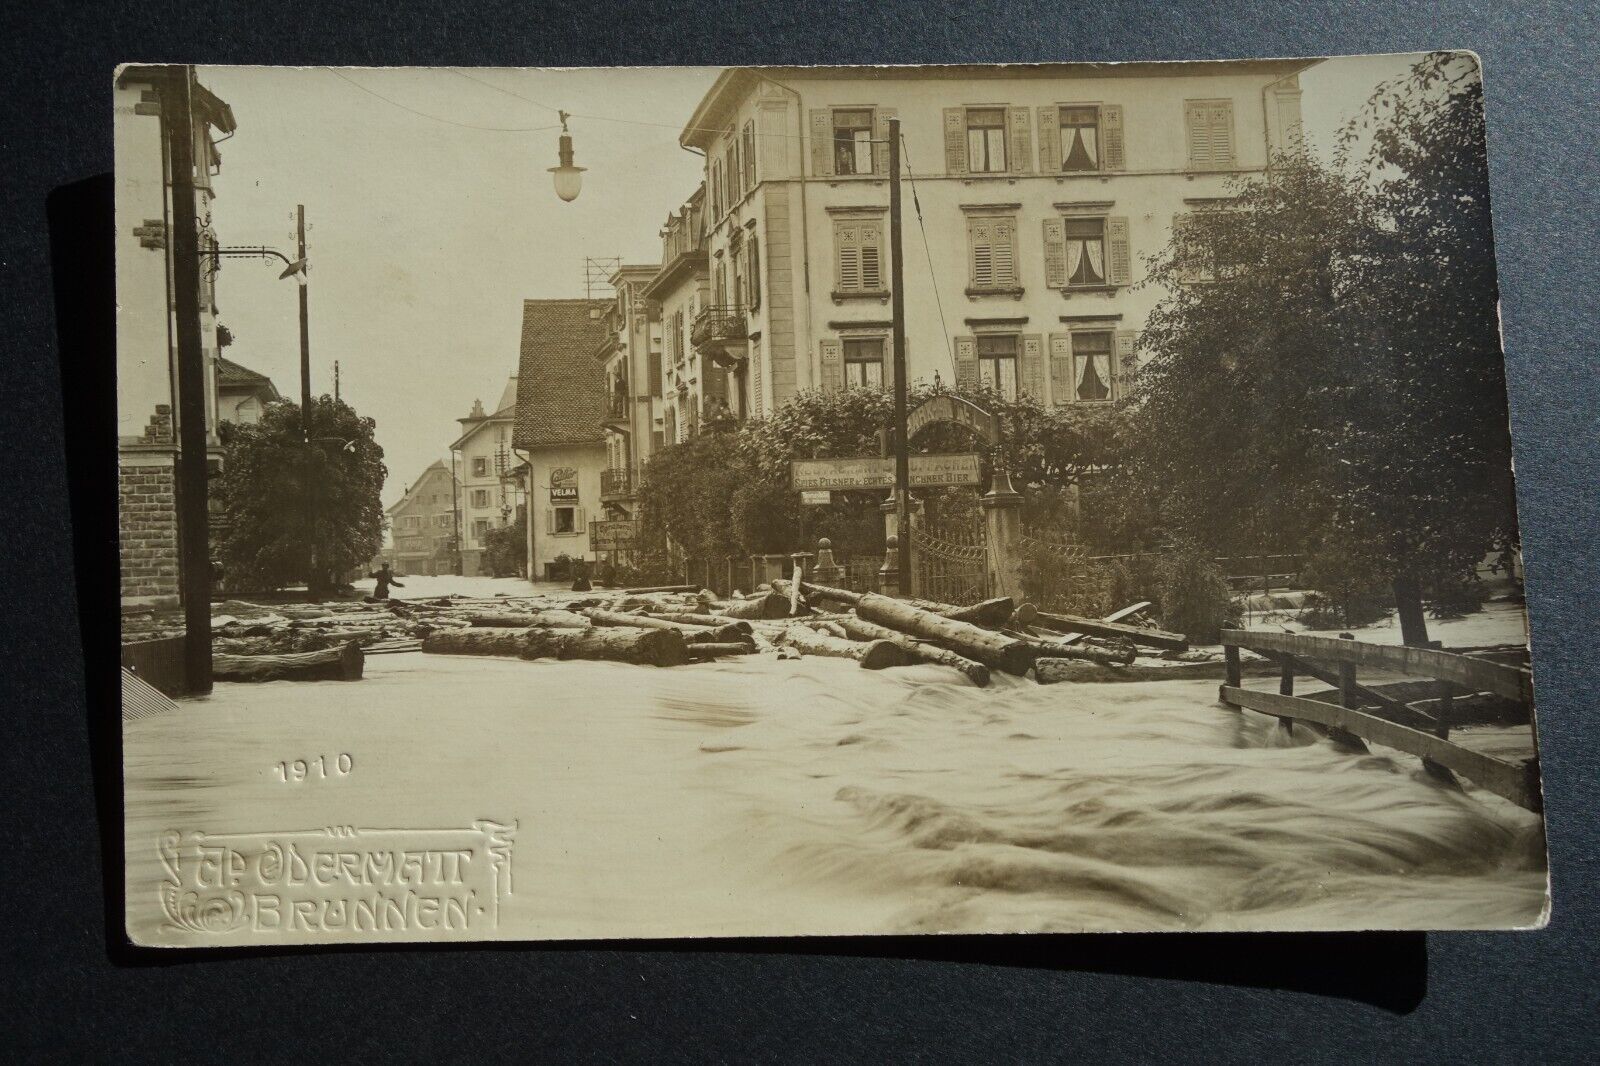 1910 flooded European town logs floating through streets real photo postcard